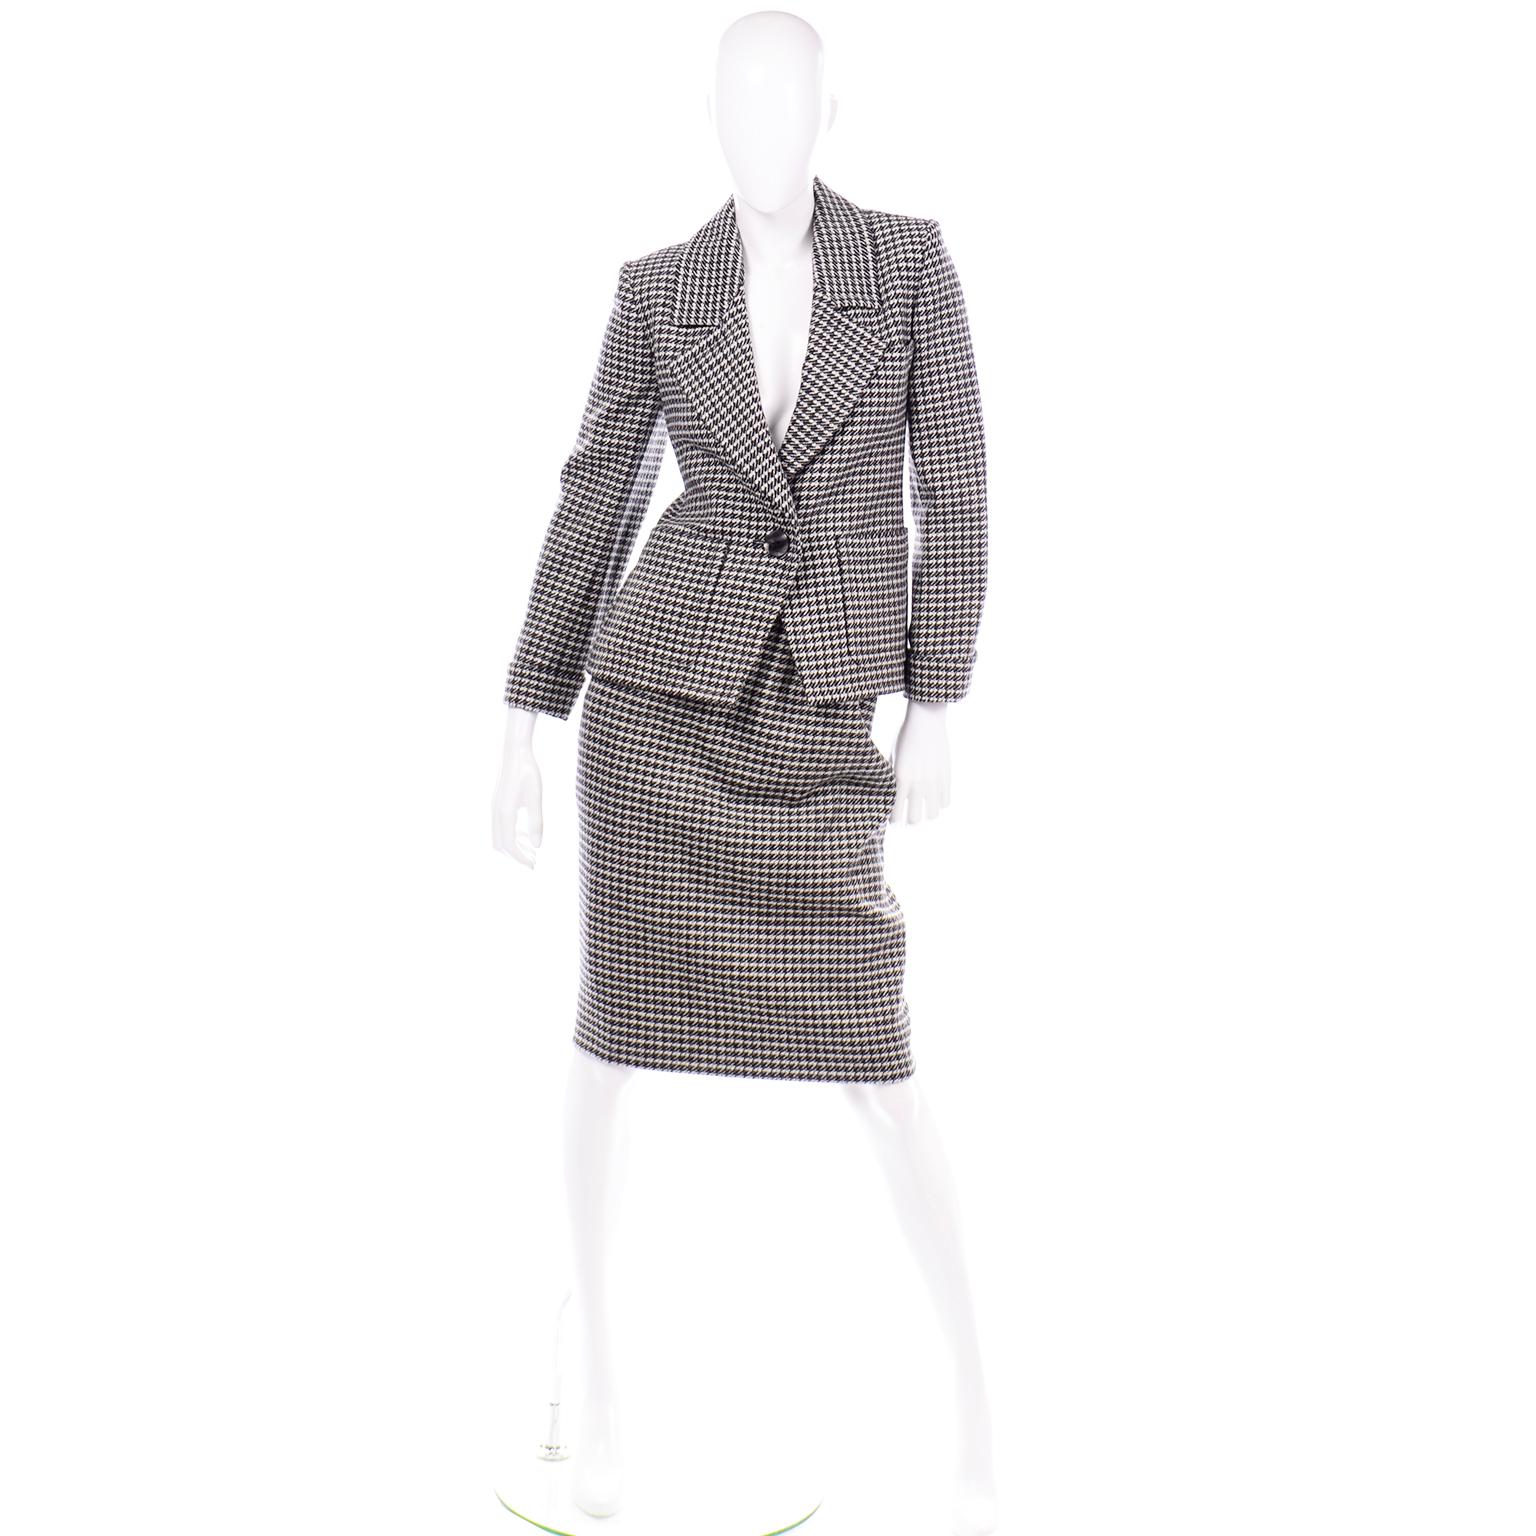 This vintage YSL two piece houndstooth wool skirt suit is in as new condition. This Yves Saint Laurent Rive Gauche early 1980's pencil skirt and single breasted blazer  jacket was most likely never worn! The suit is fully lined and has beautiful